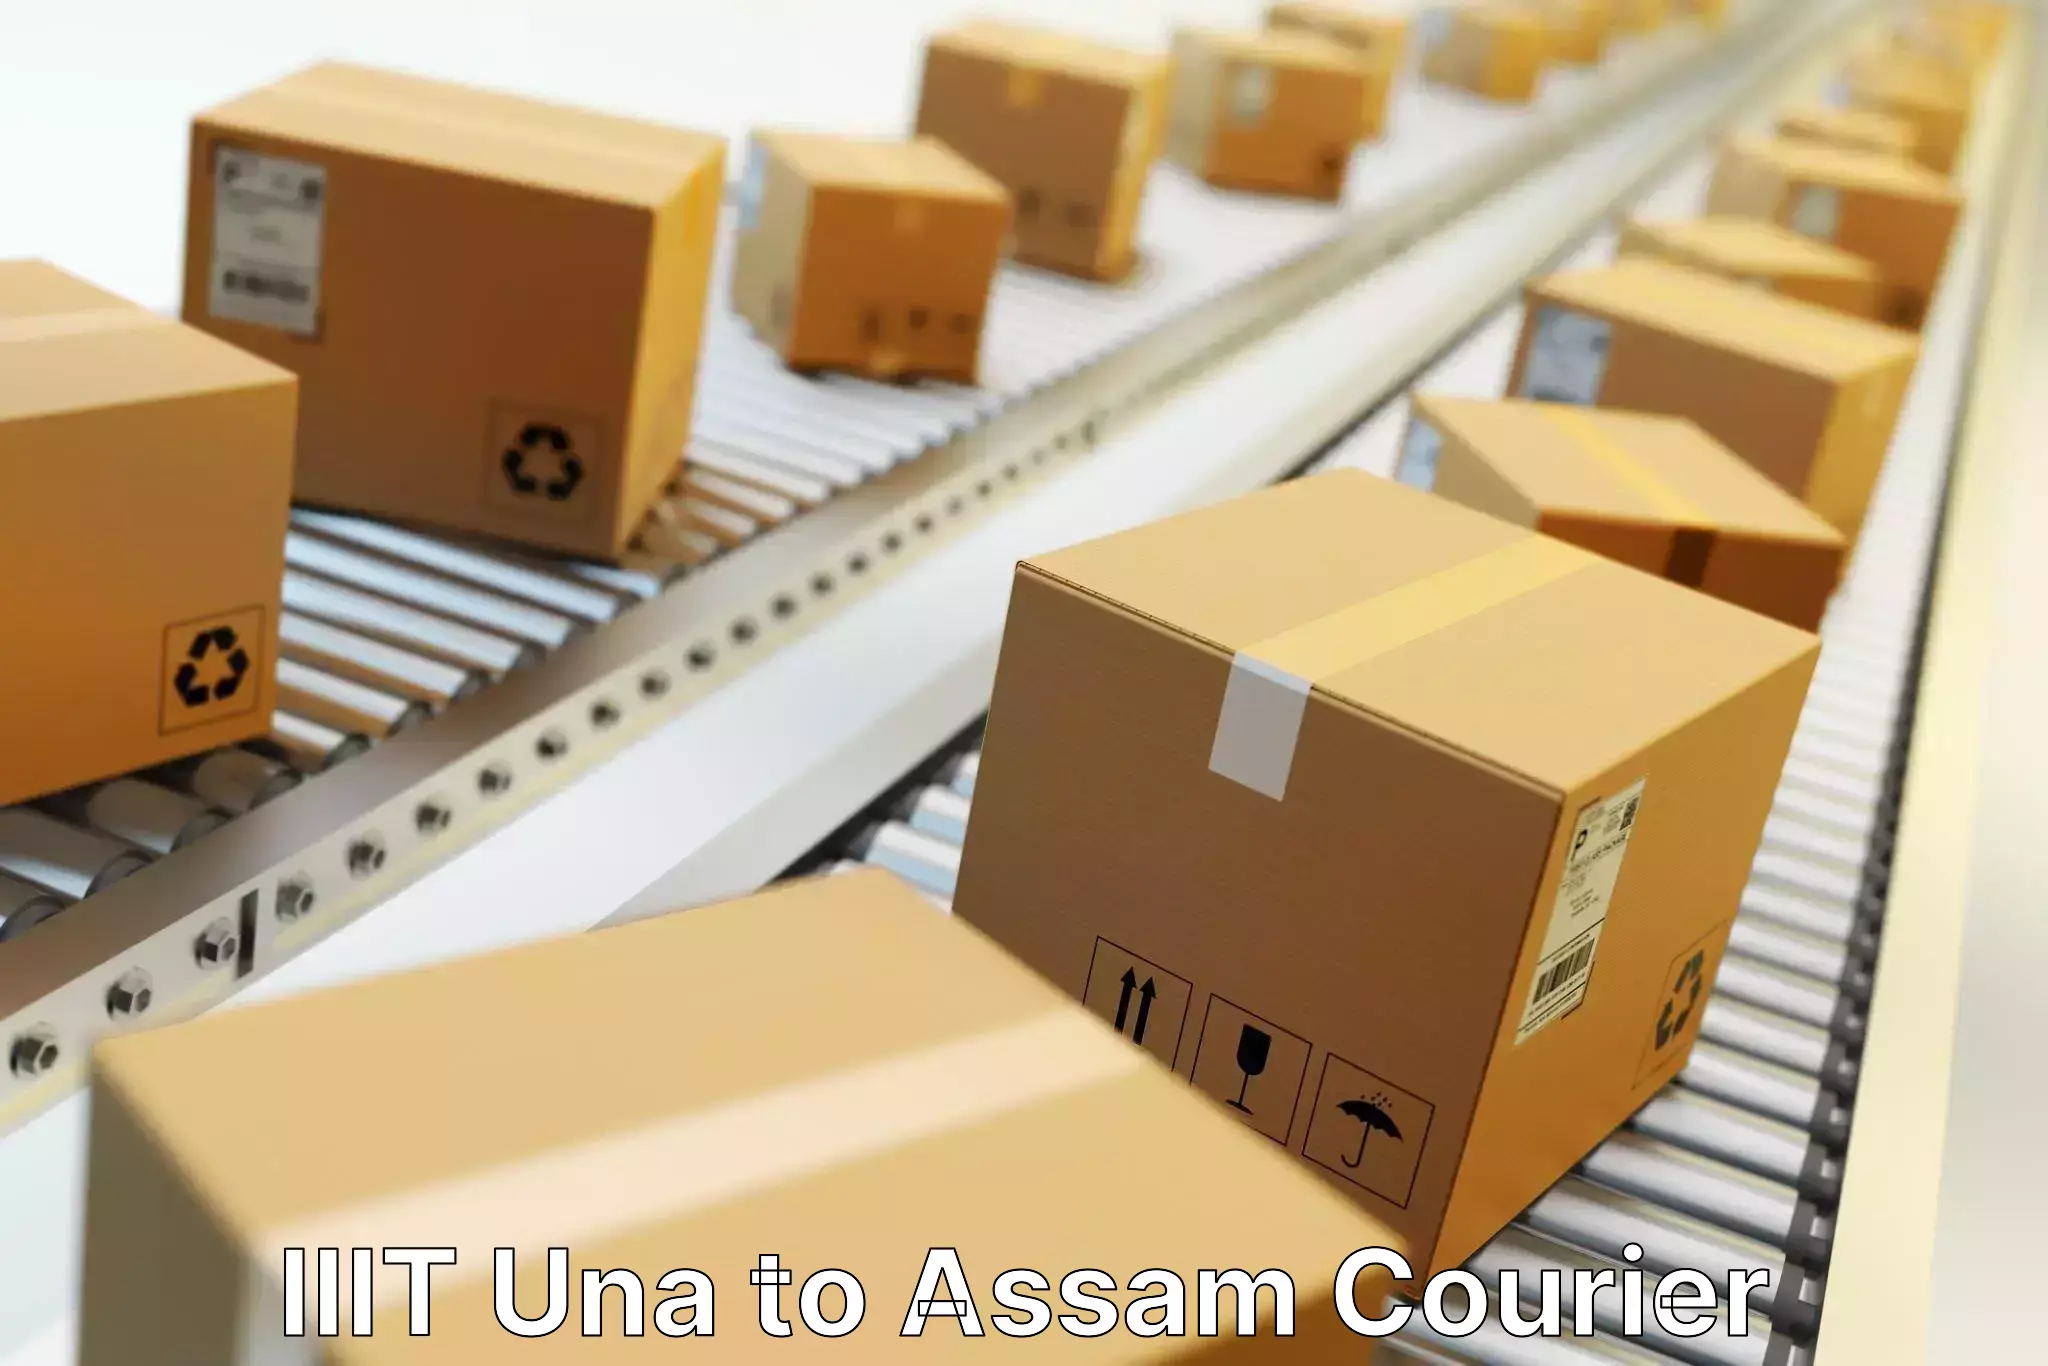 Seamless shipping experience IIIT Una to Jorhat